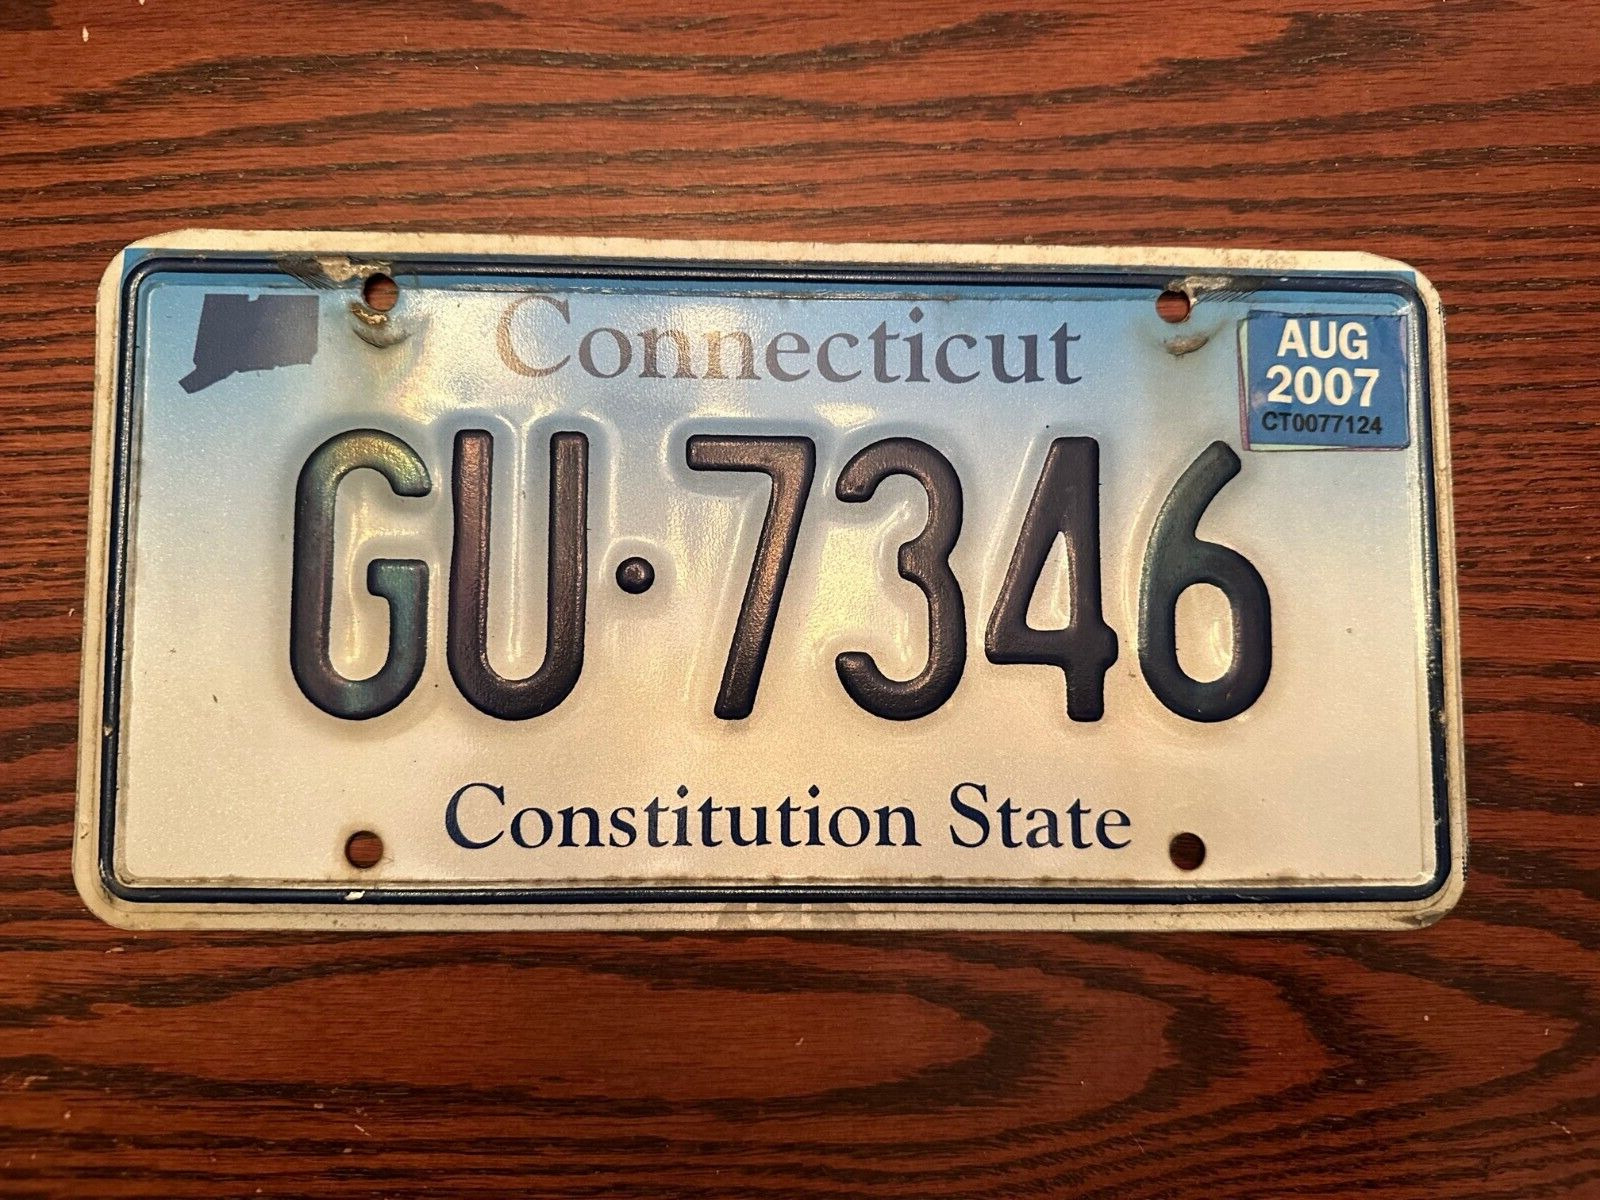 2007 Connecticut License Plate GU 7346 Constitution State Blue Fade CT August